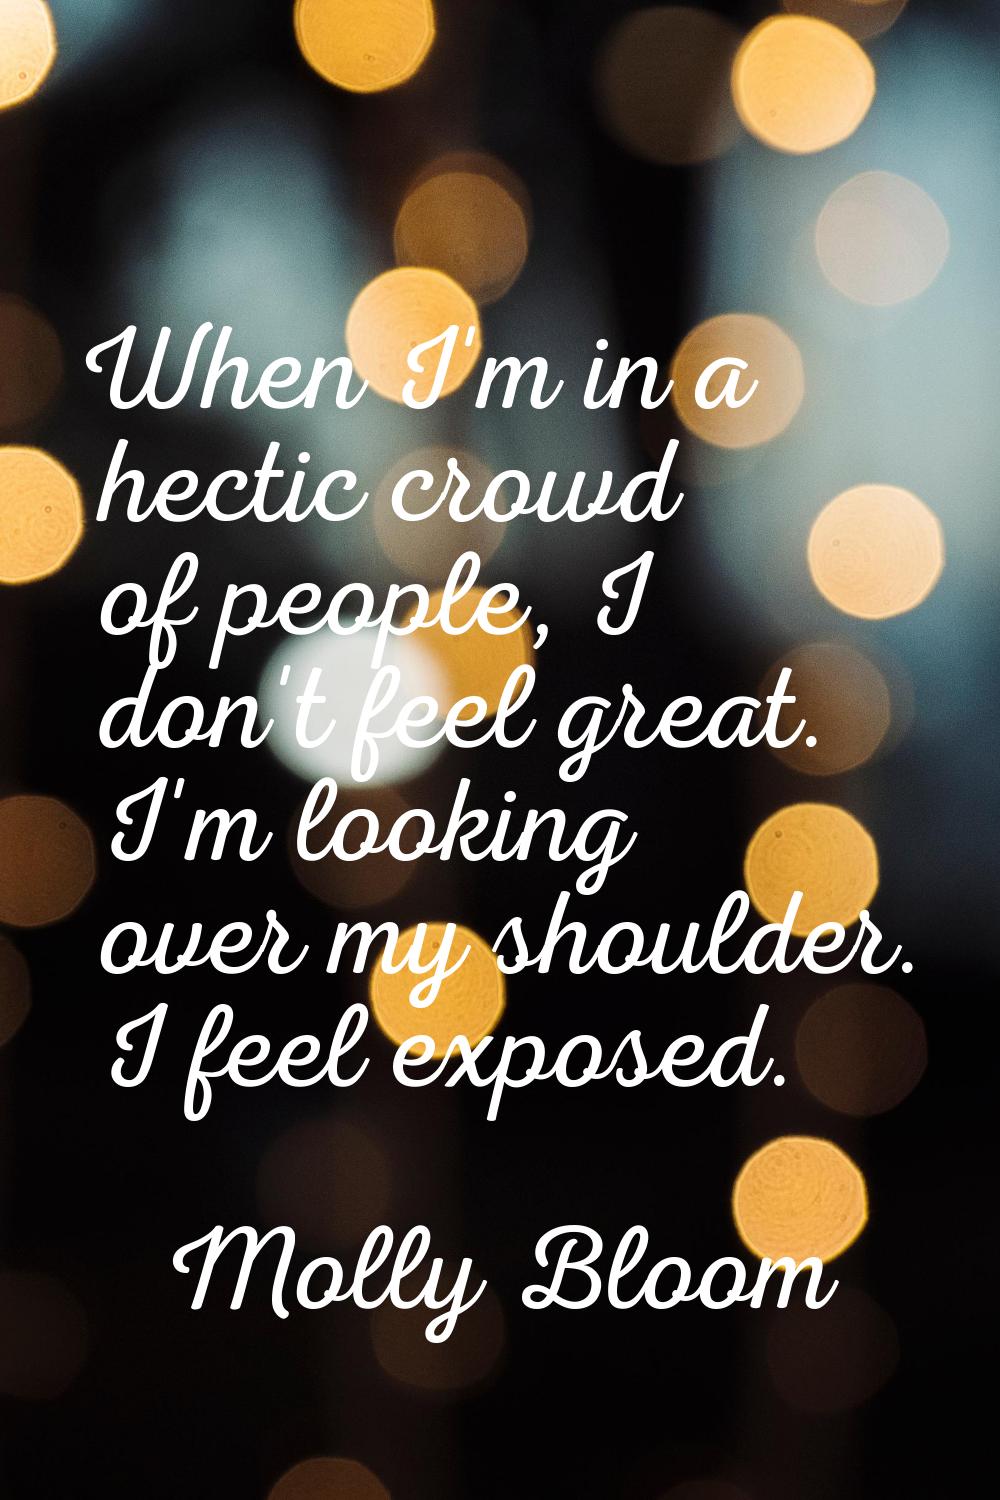 When I'm in a hectic crowd of people, I don't feel great. I'm looking over my shoulder. I feel expo